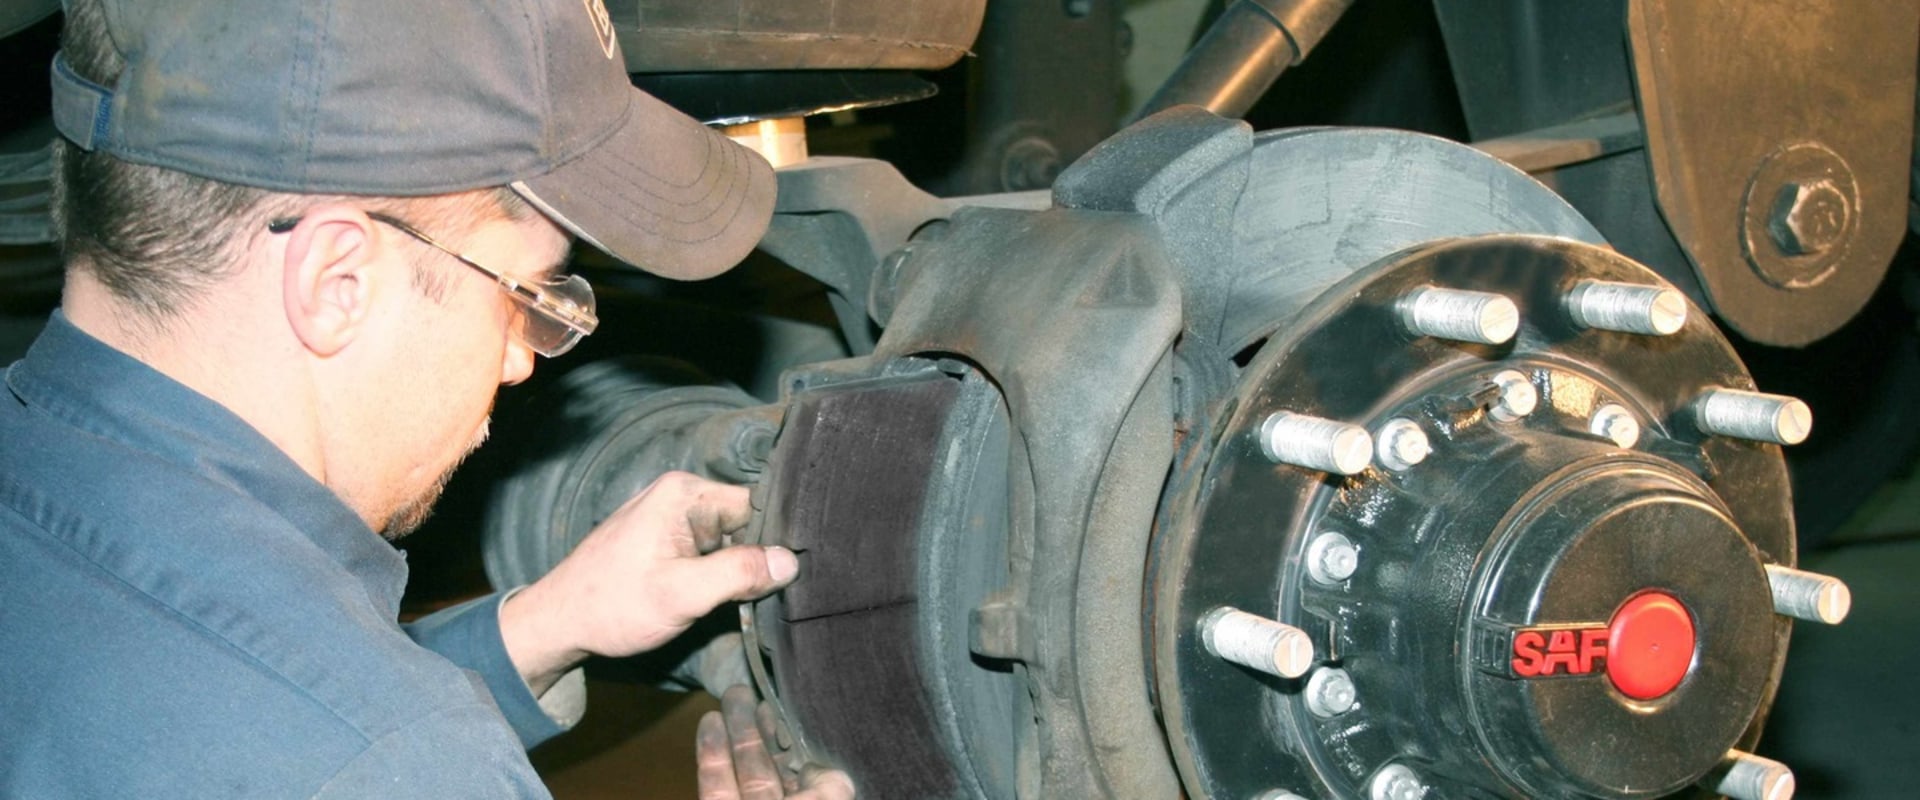 How to Replace Brake Pads and Rotors: Step-by-Step